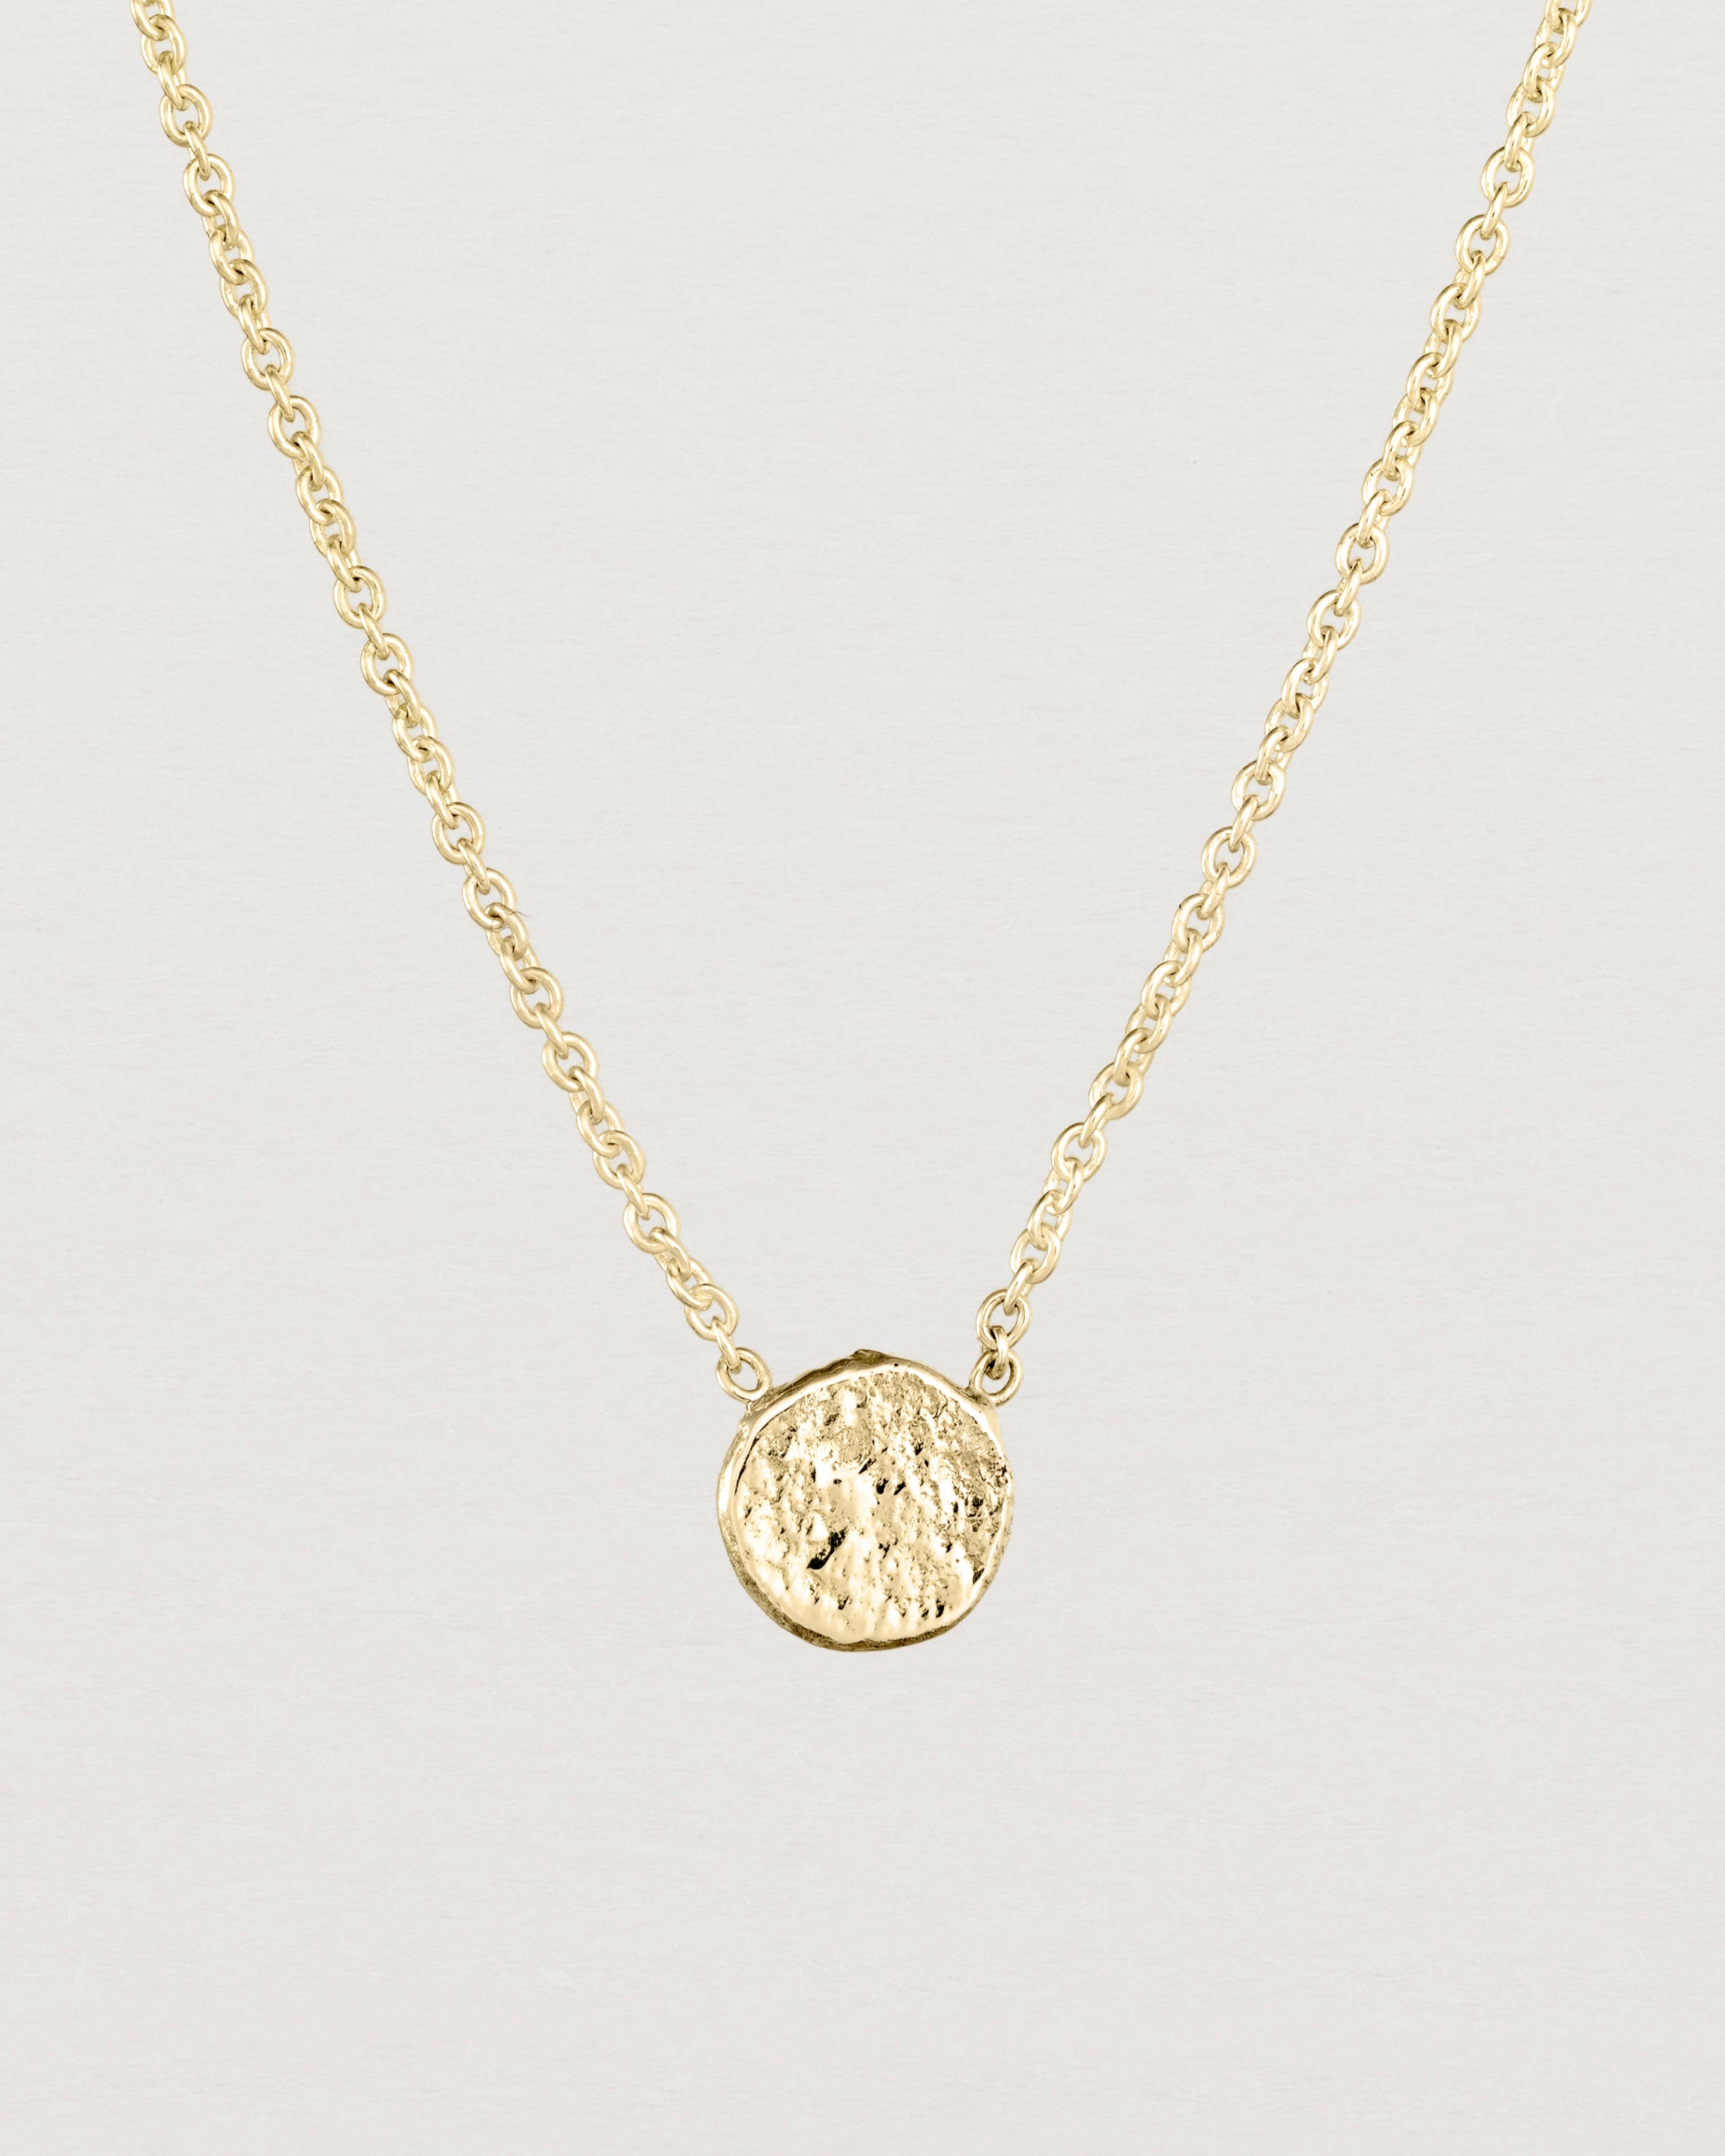 Close up view of the Moon Necklace in yellow gold.